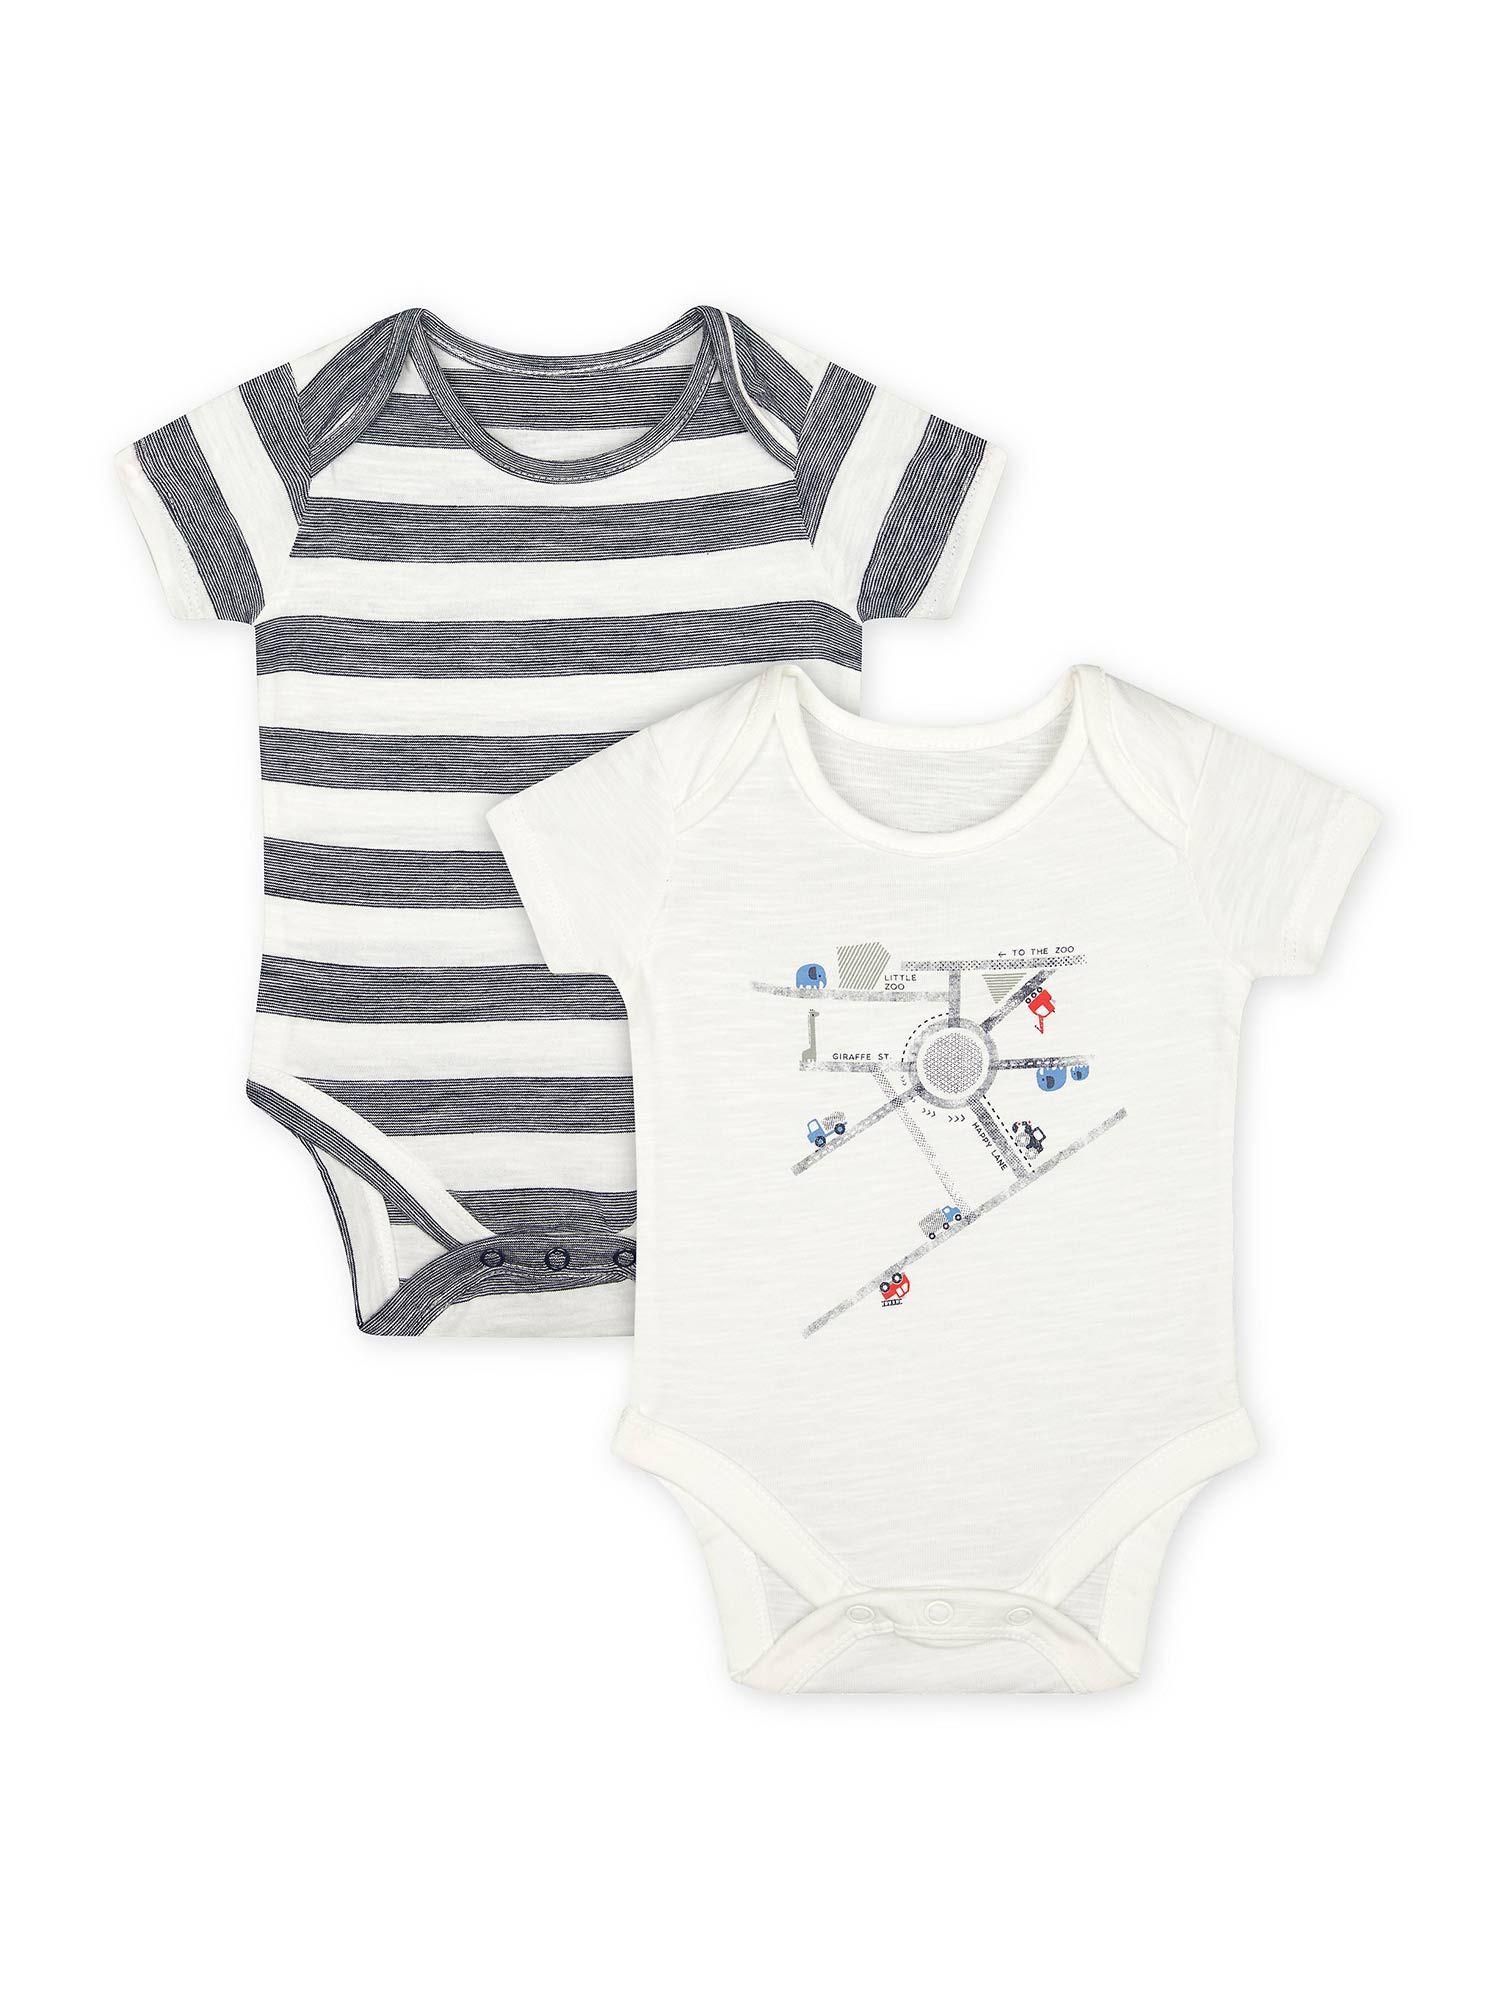 boys half sleeves bodysuit striped and printed (pack of 2)